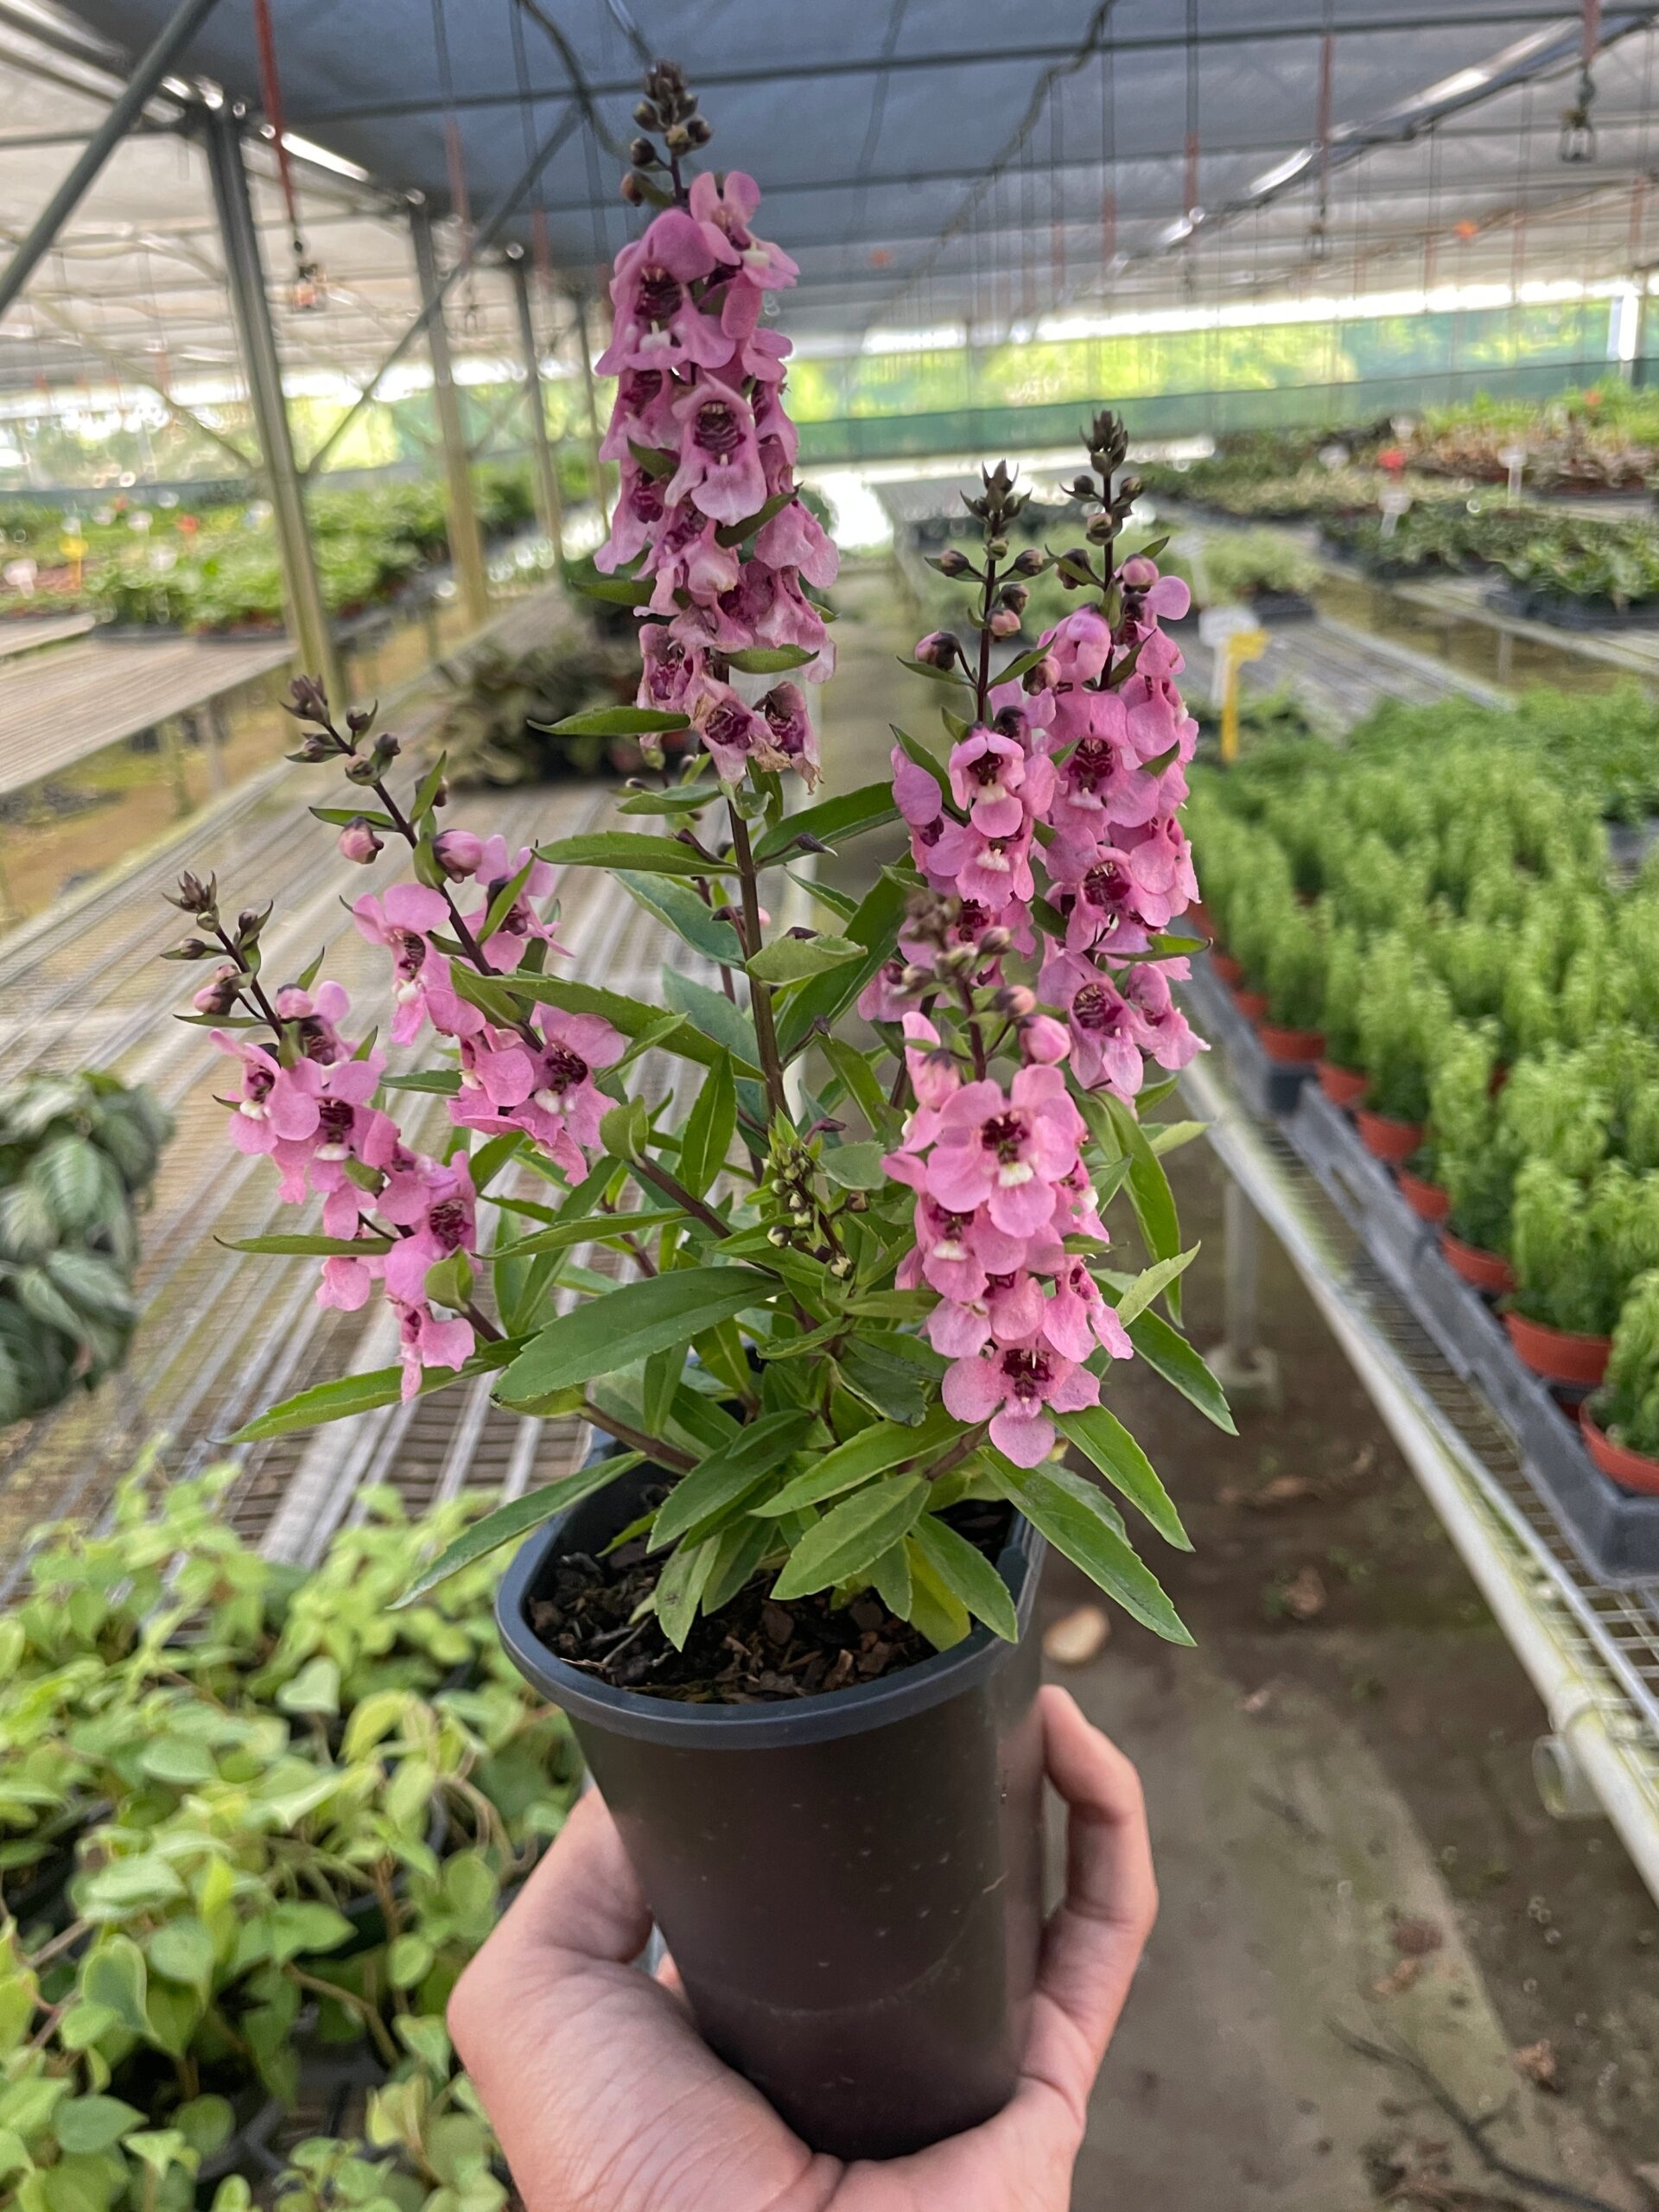 A hand holds a black pot containing a flowering pink Angelonia plant in a greenhouse with rows of various potted plants in the background.